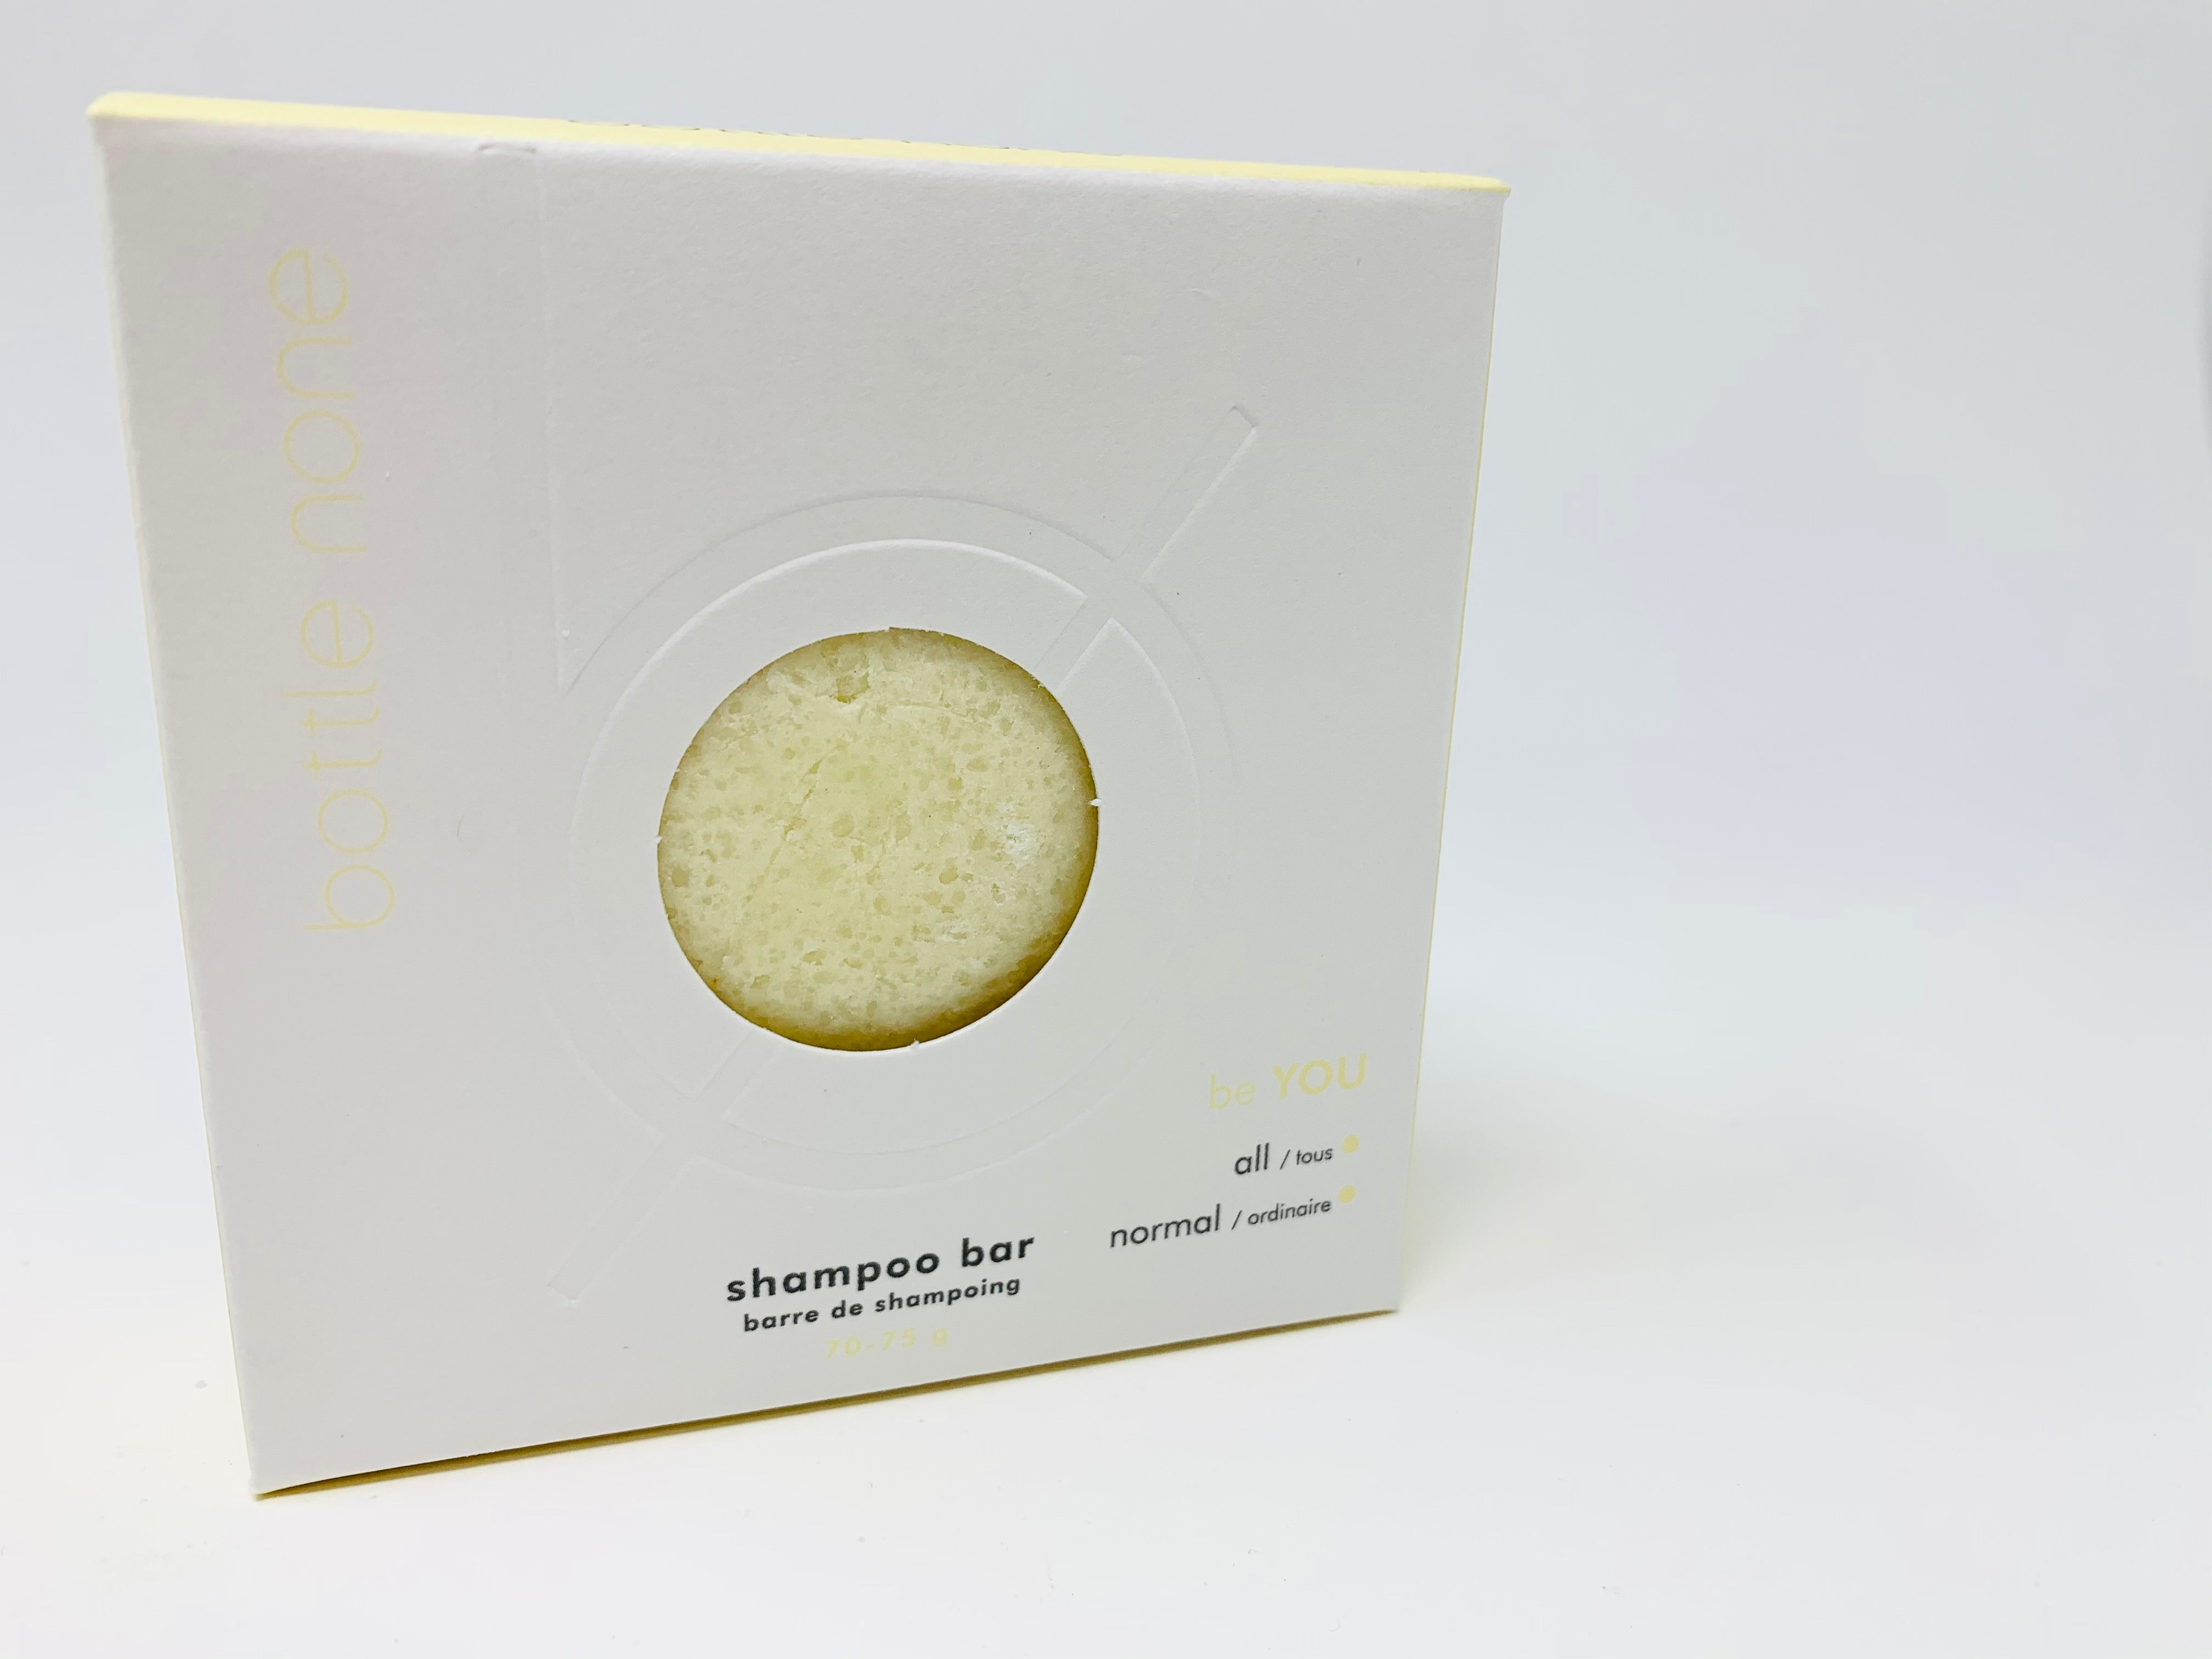 be YOU Shampoo Bar 70-75g be YOU - nelsonnaturals remineralizing toothpaste